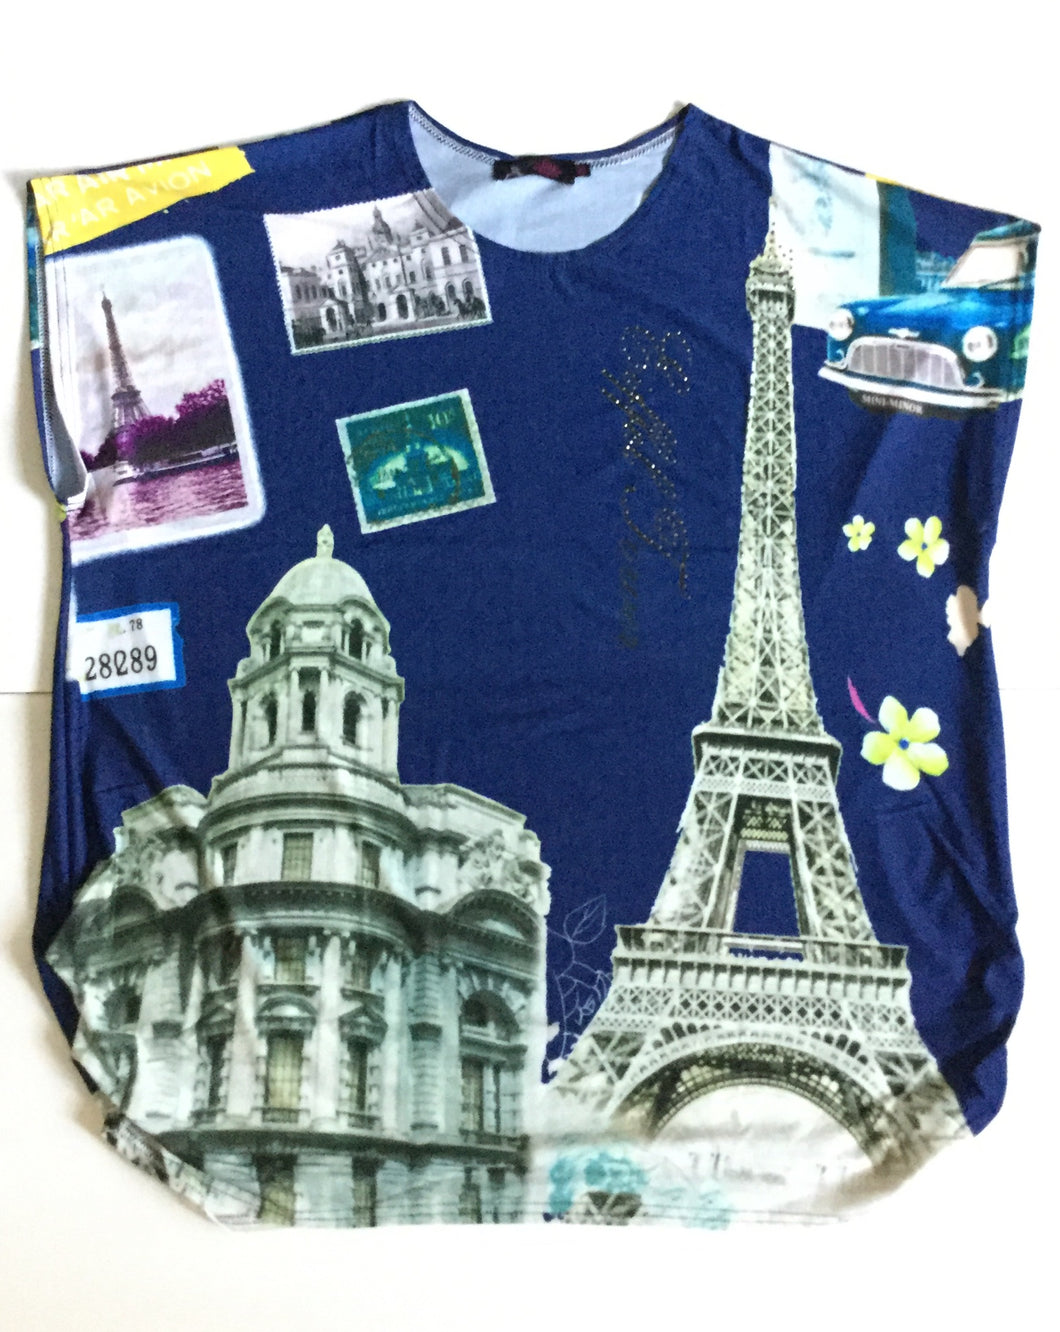 Eiffel Tower and Monument Fun Top